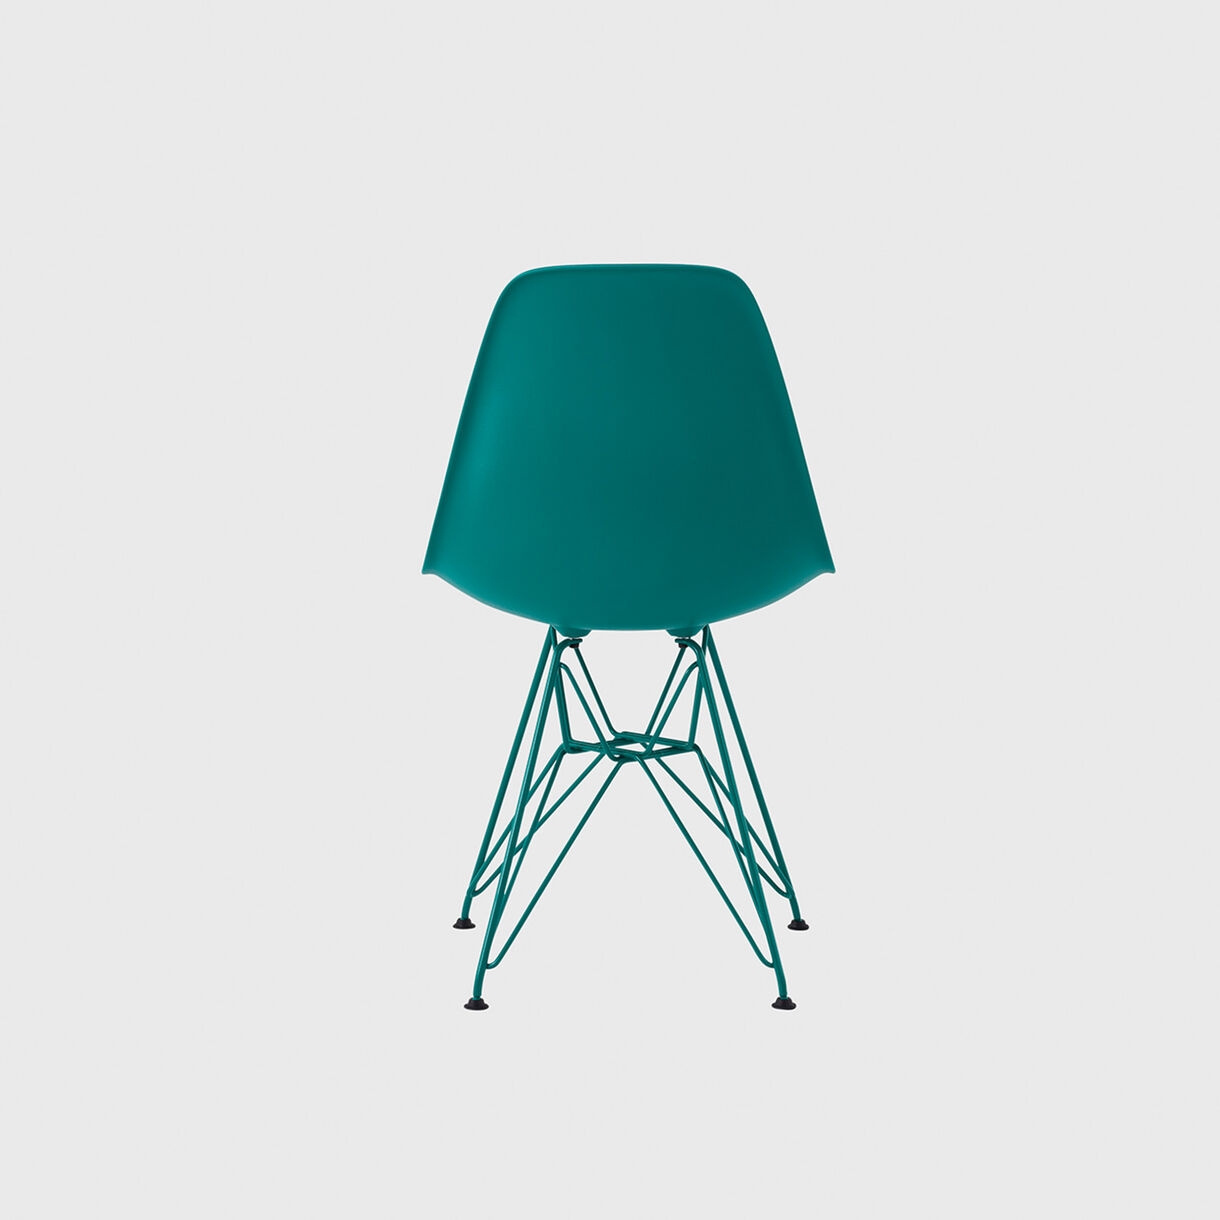 HM x Hay Eames Moulded Plastic Side Chair, Wire Base, Mint Green